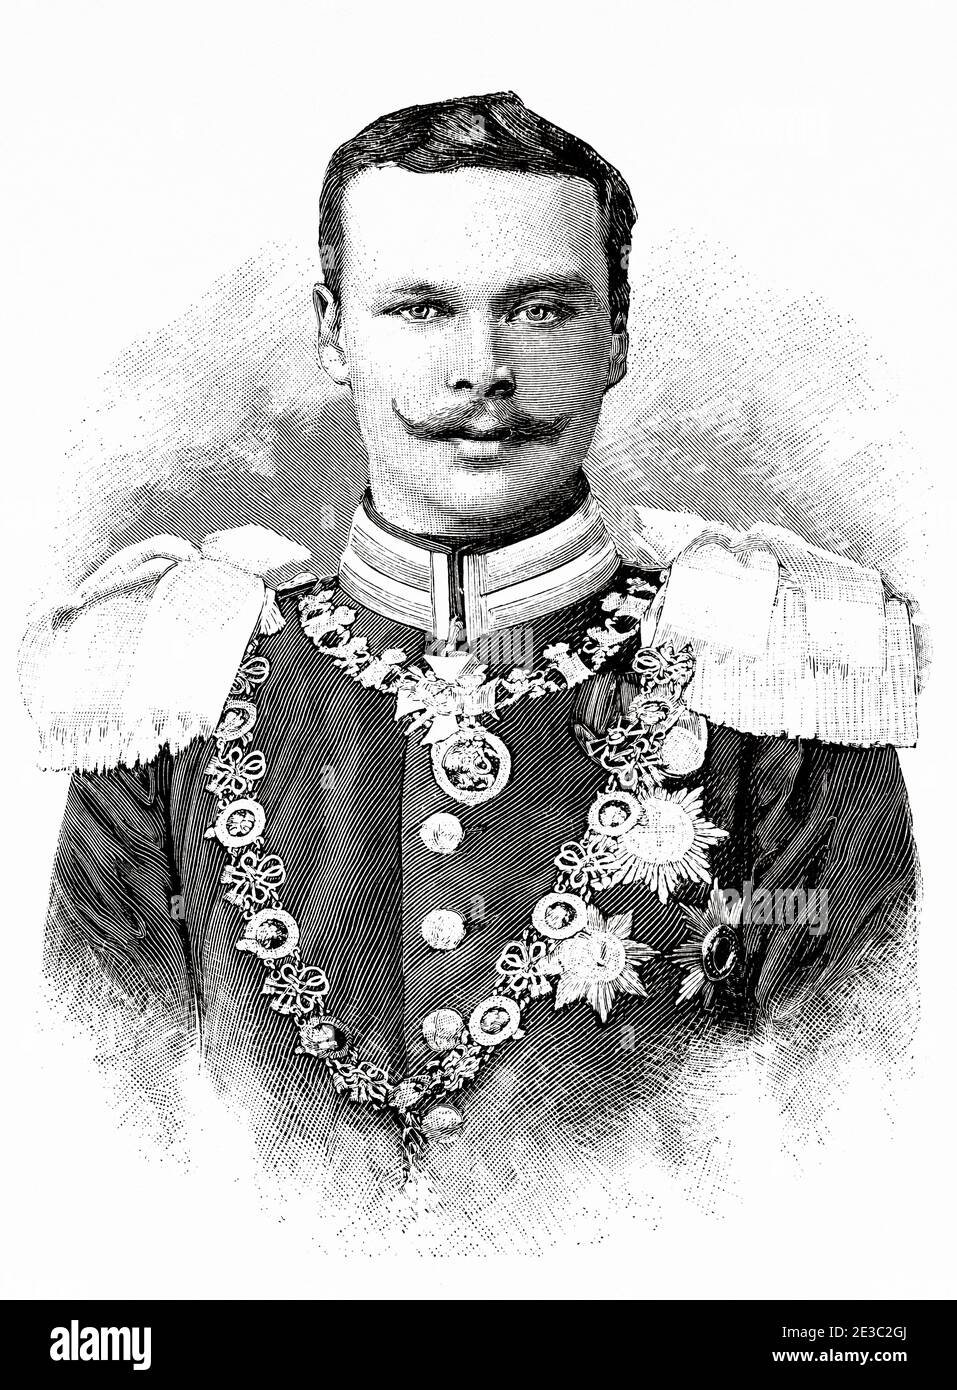 Portrait of Ernest Louis Charles Albert William (1868-1937) last Grand Duke of Hesse and by Rhine, grandson of Queen Victoria, during World War I he served in the German military. Germany, Europe. Old XIX century engraved illustration from La Ilustracion Española y Americana 1894 Stock Photo